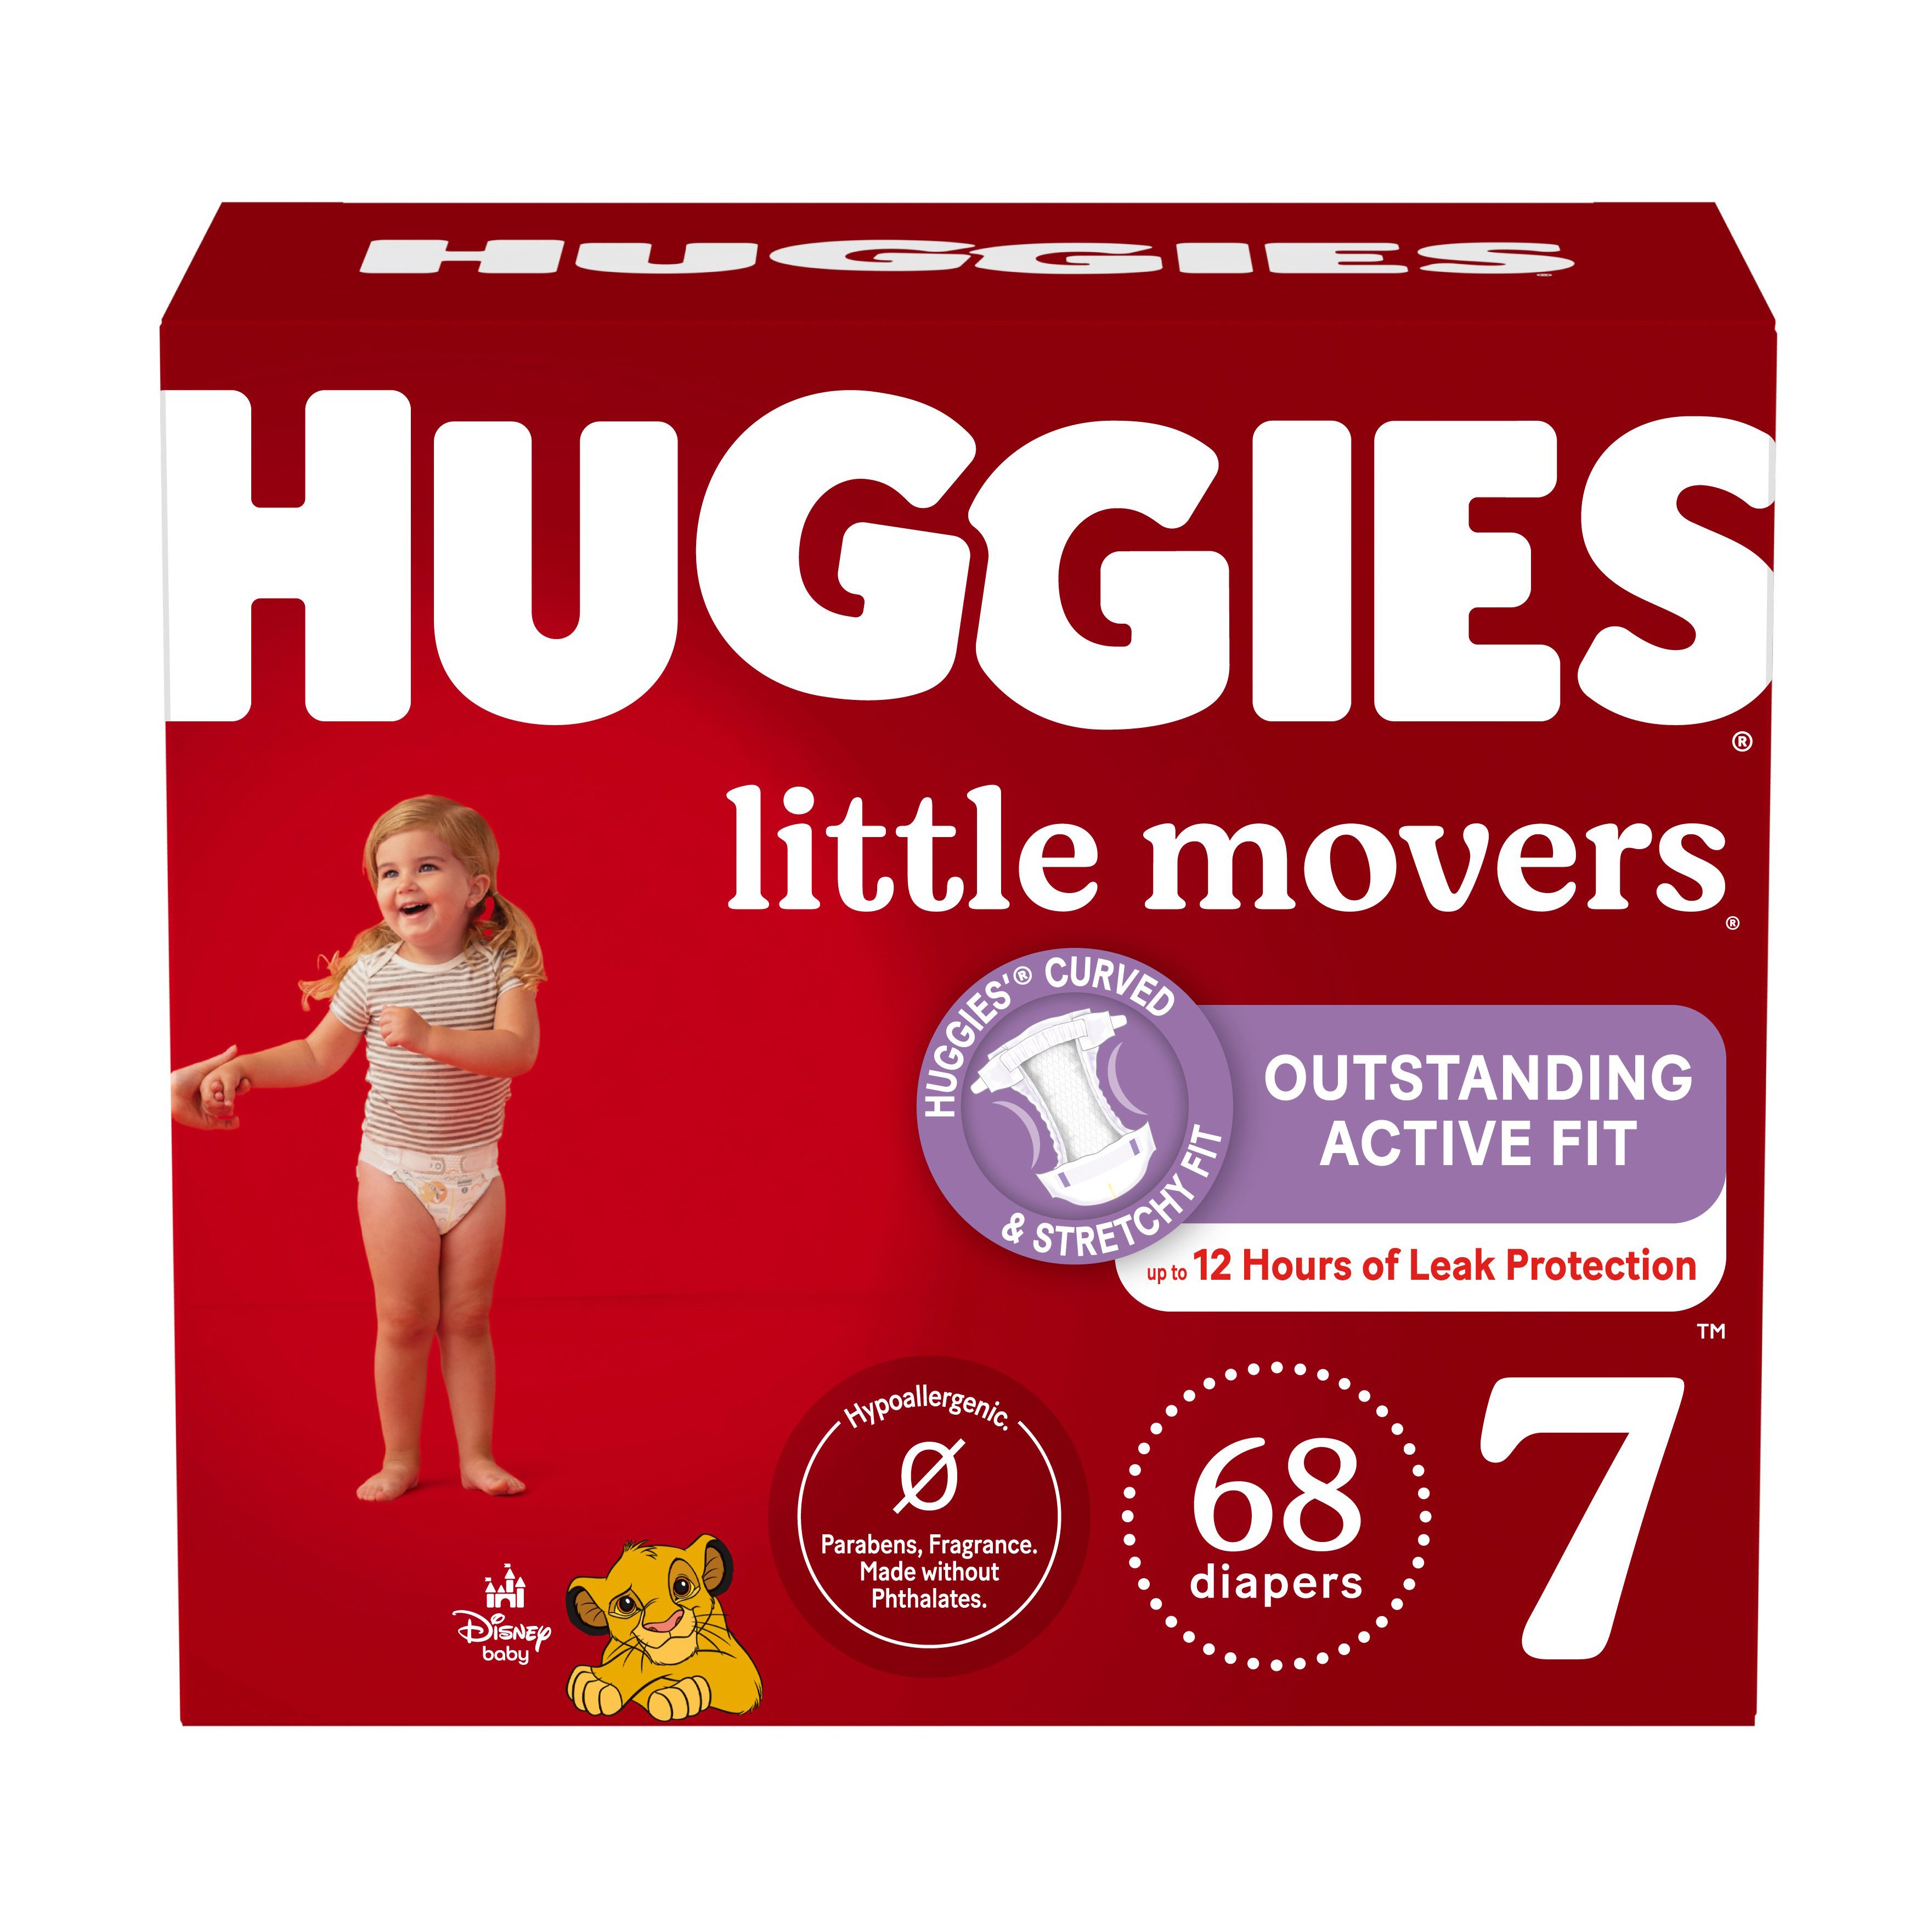 Luvs Paw Patrol Baby Diapers - Size 5 - Shop Diapers at H-E-B